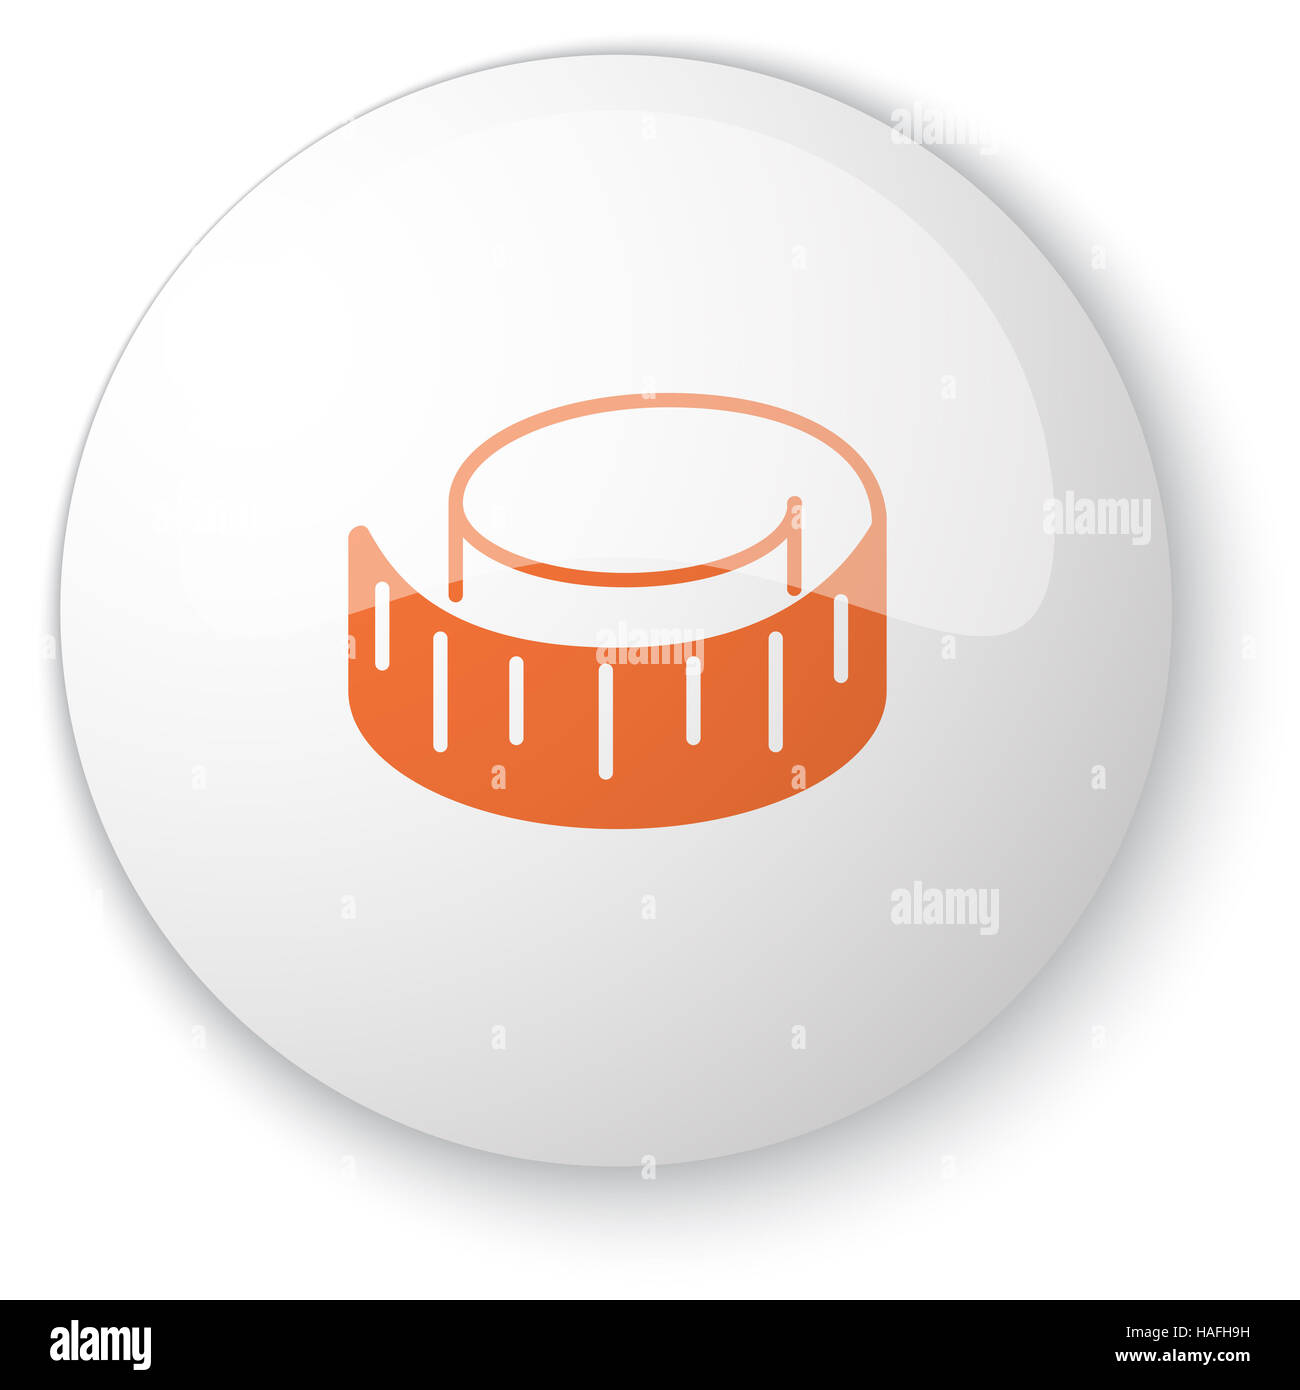 https://c8.alamy.com/comp/HAFH9H/glossy-white-web-button-with-orange-measuring-tape-icon-on-white-background-HAFH9H.jpg